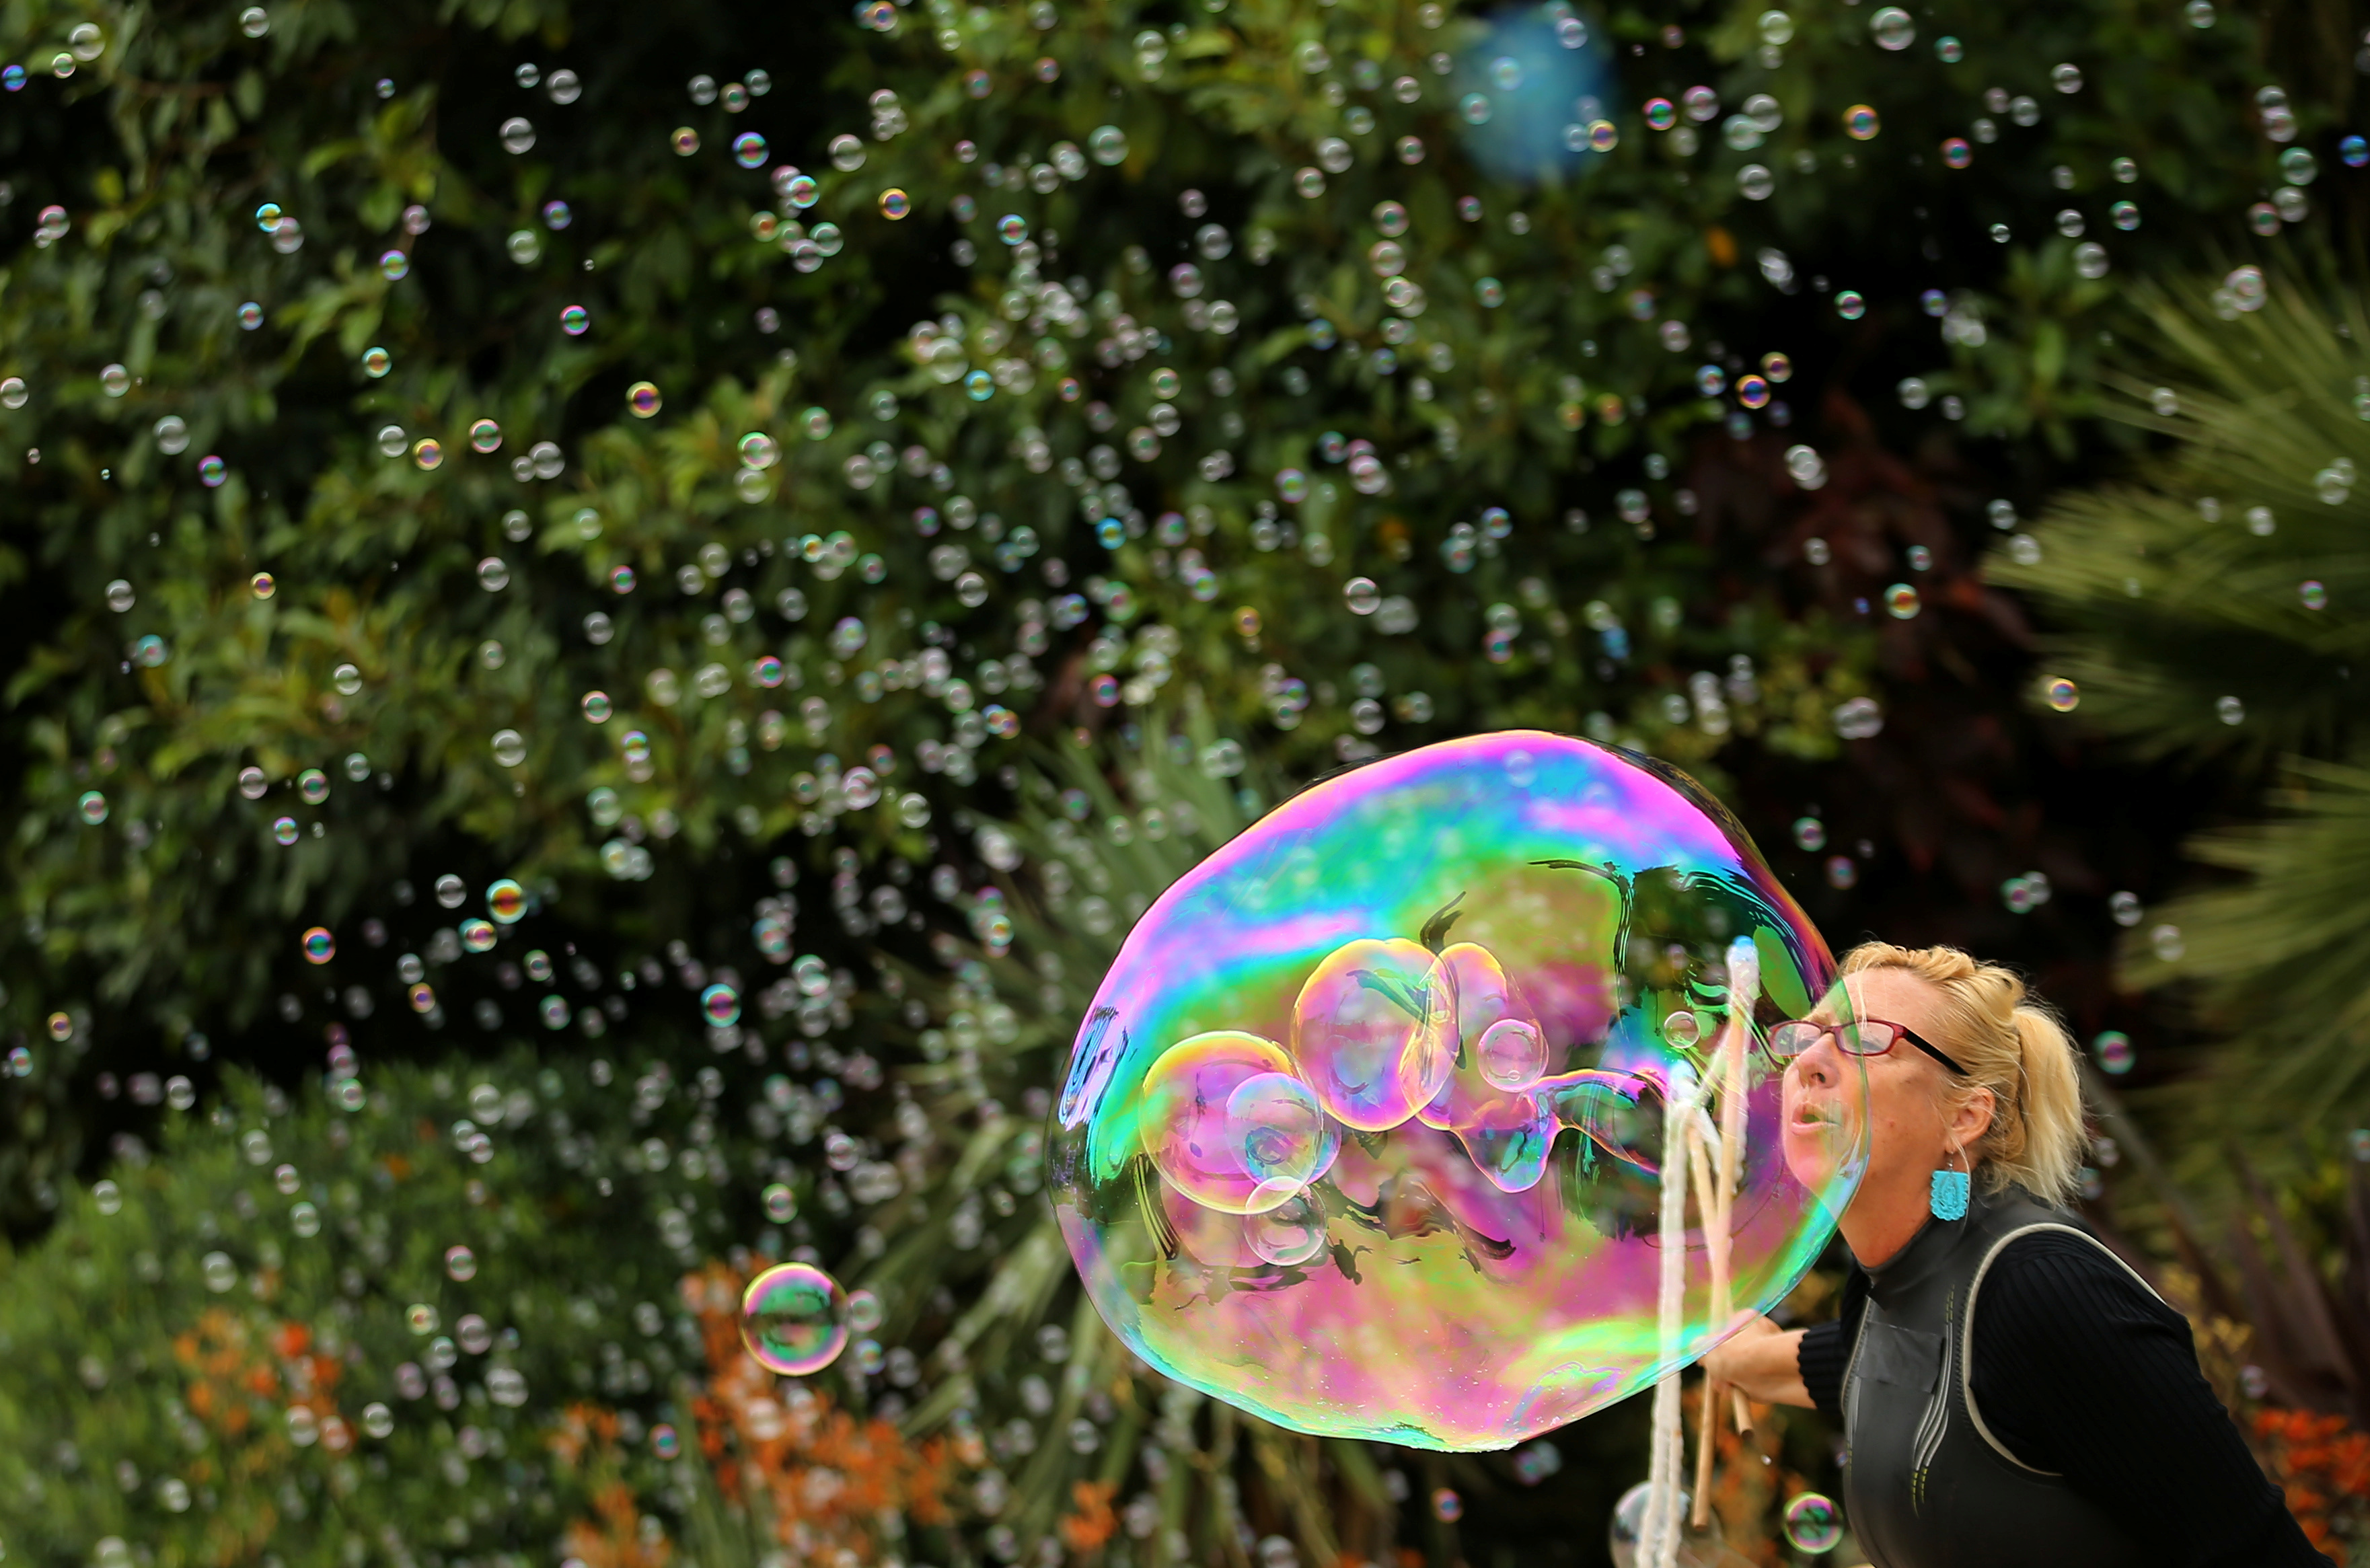 A woman makes a bubble during a performance at SeaWorld in San Diego, California.